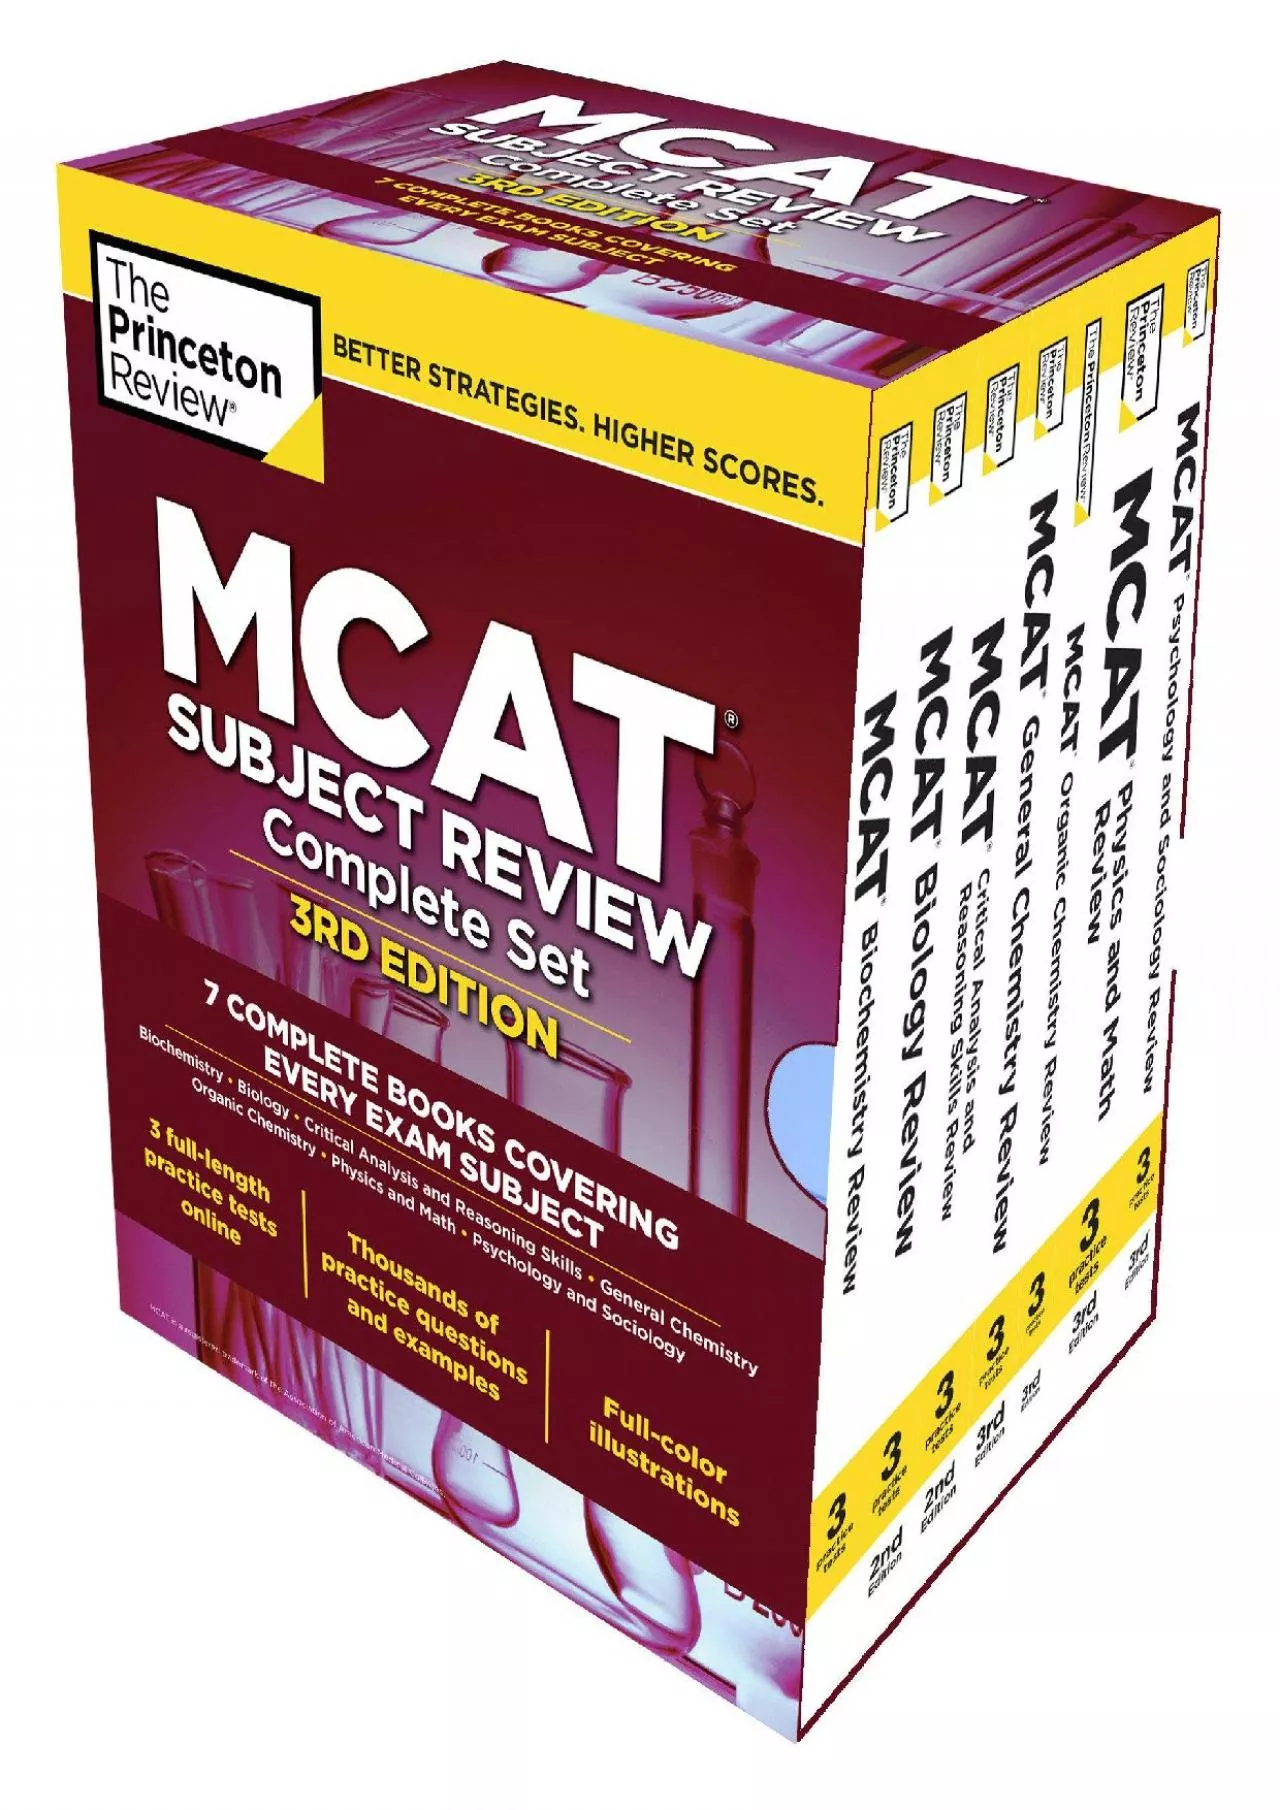 [DOWNLOAD] The Princeton Review MCAT Subject Review Complete Box Set, 3rd Edition: 7 Complete